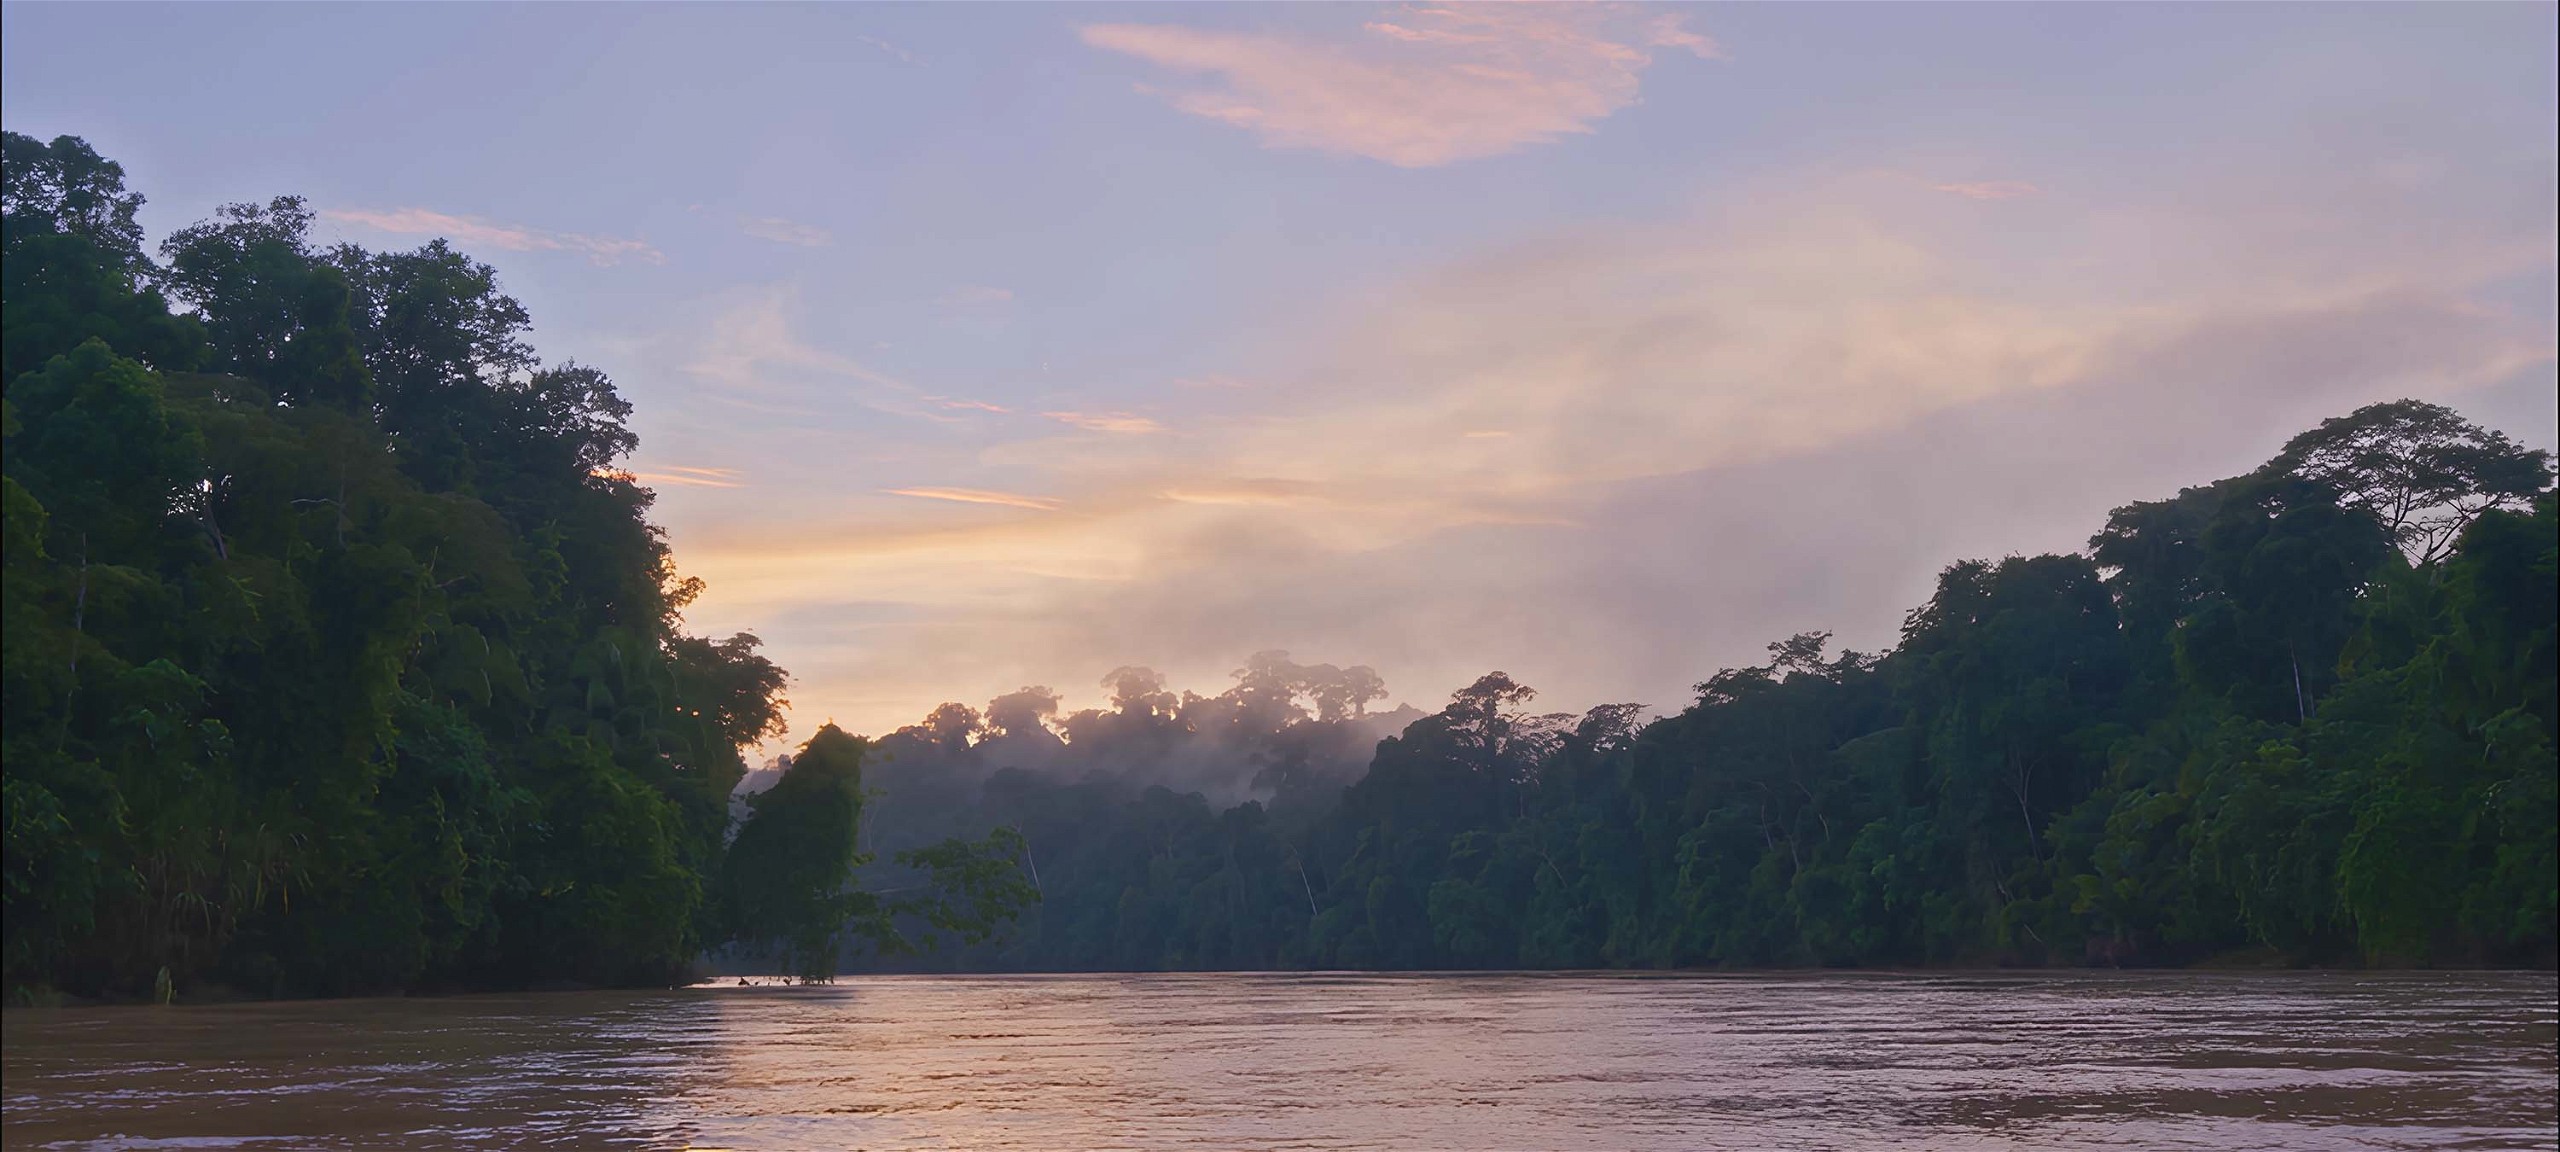 This image shows the Las Piedras river in the Amazon.jpg